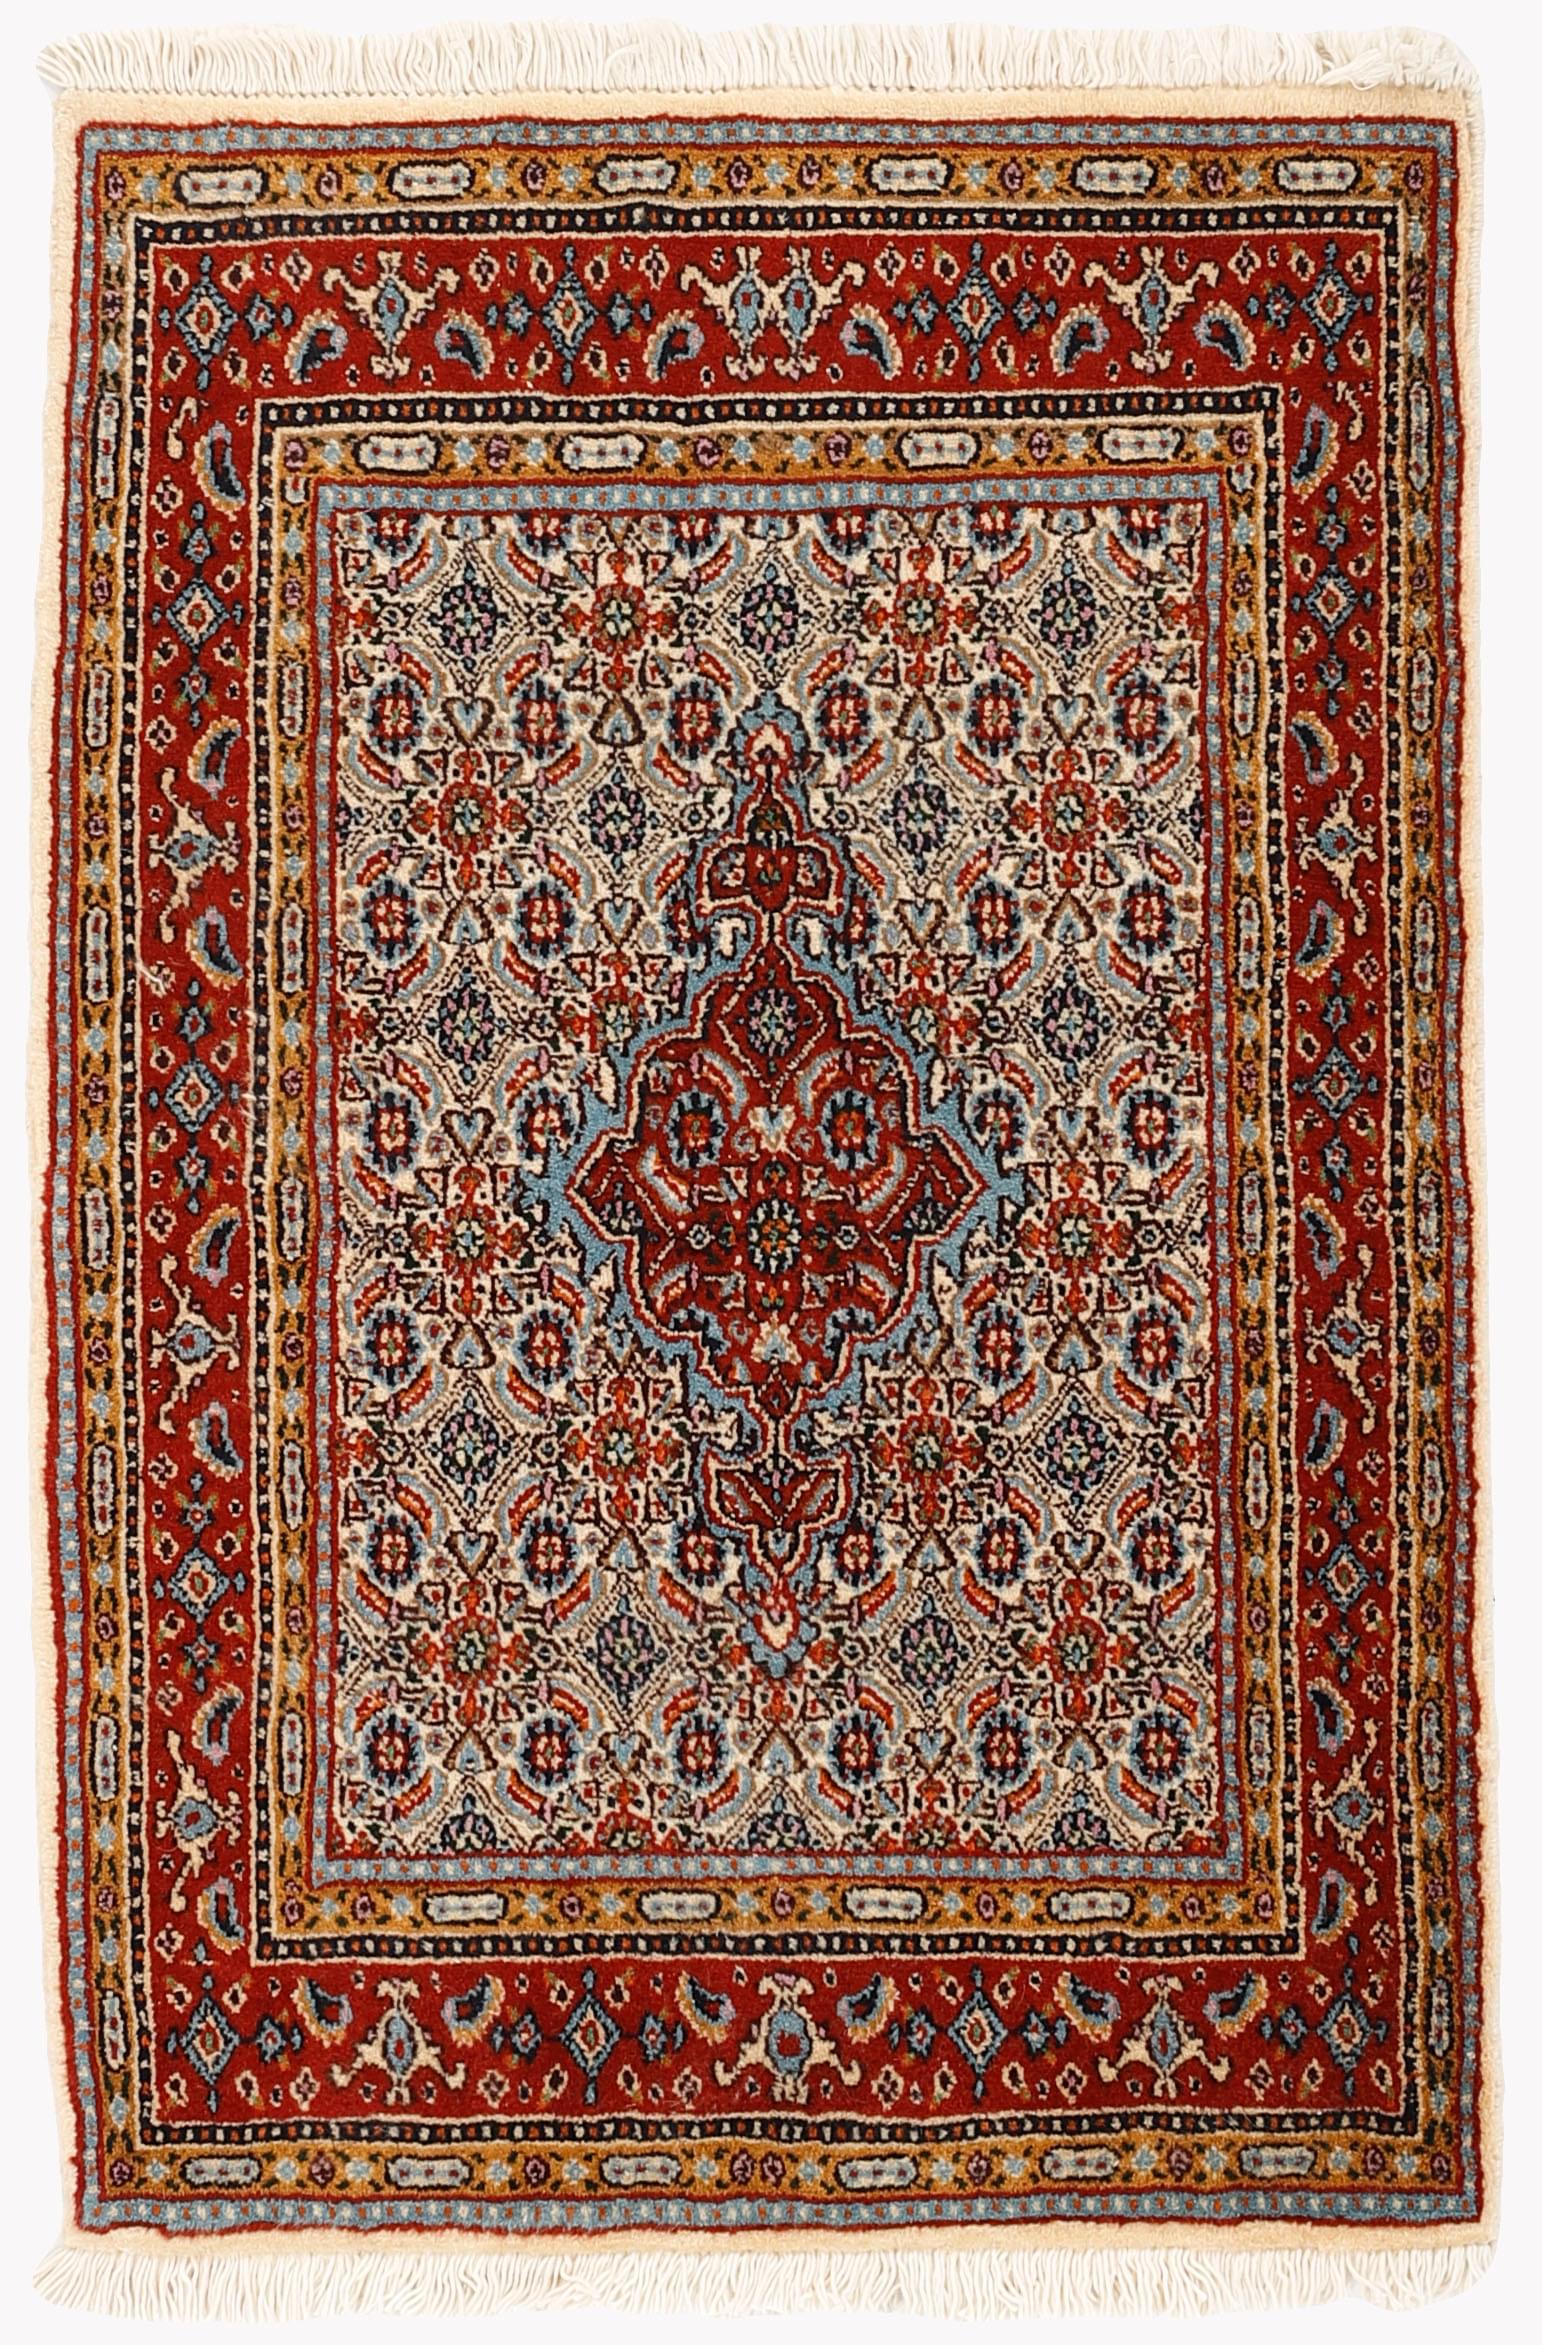 authentic persian rug with traditional floral pattern in red, blue, beige, brown and black